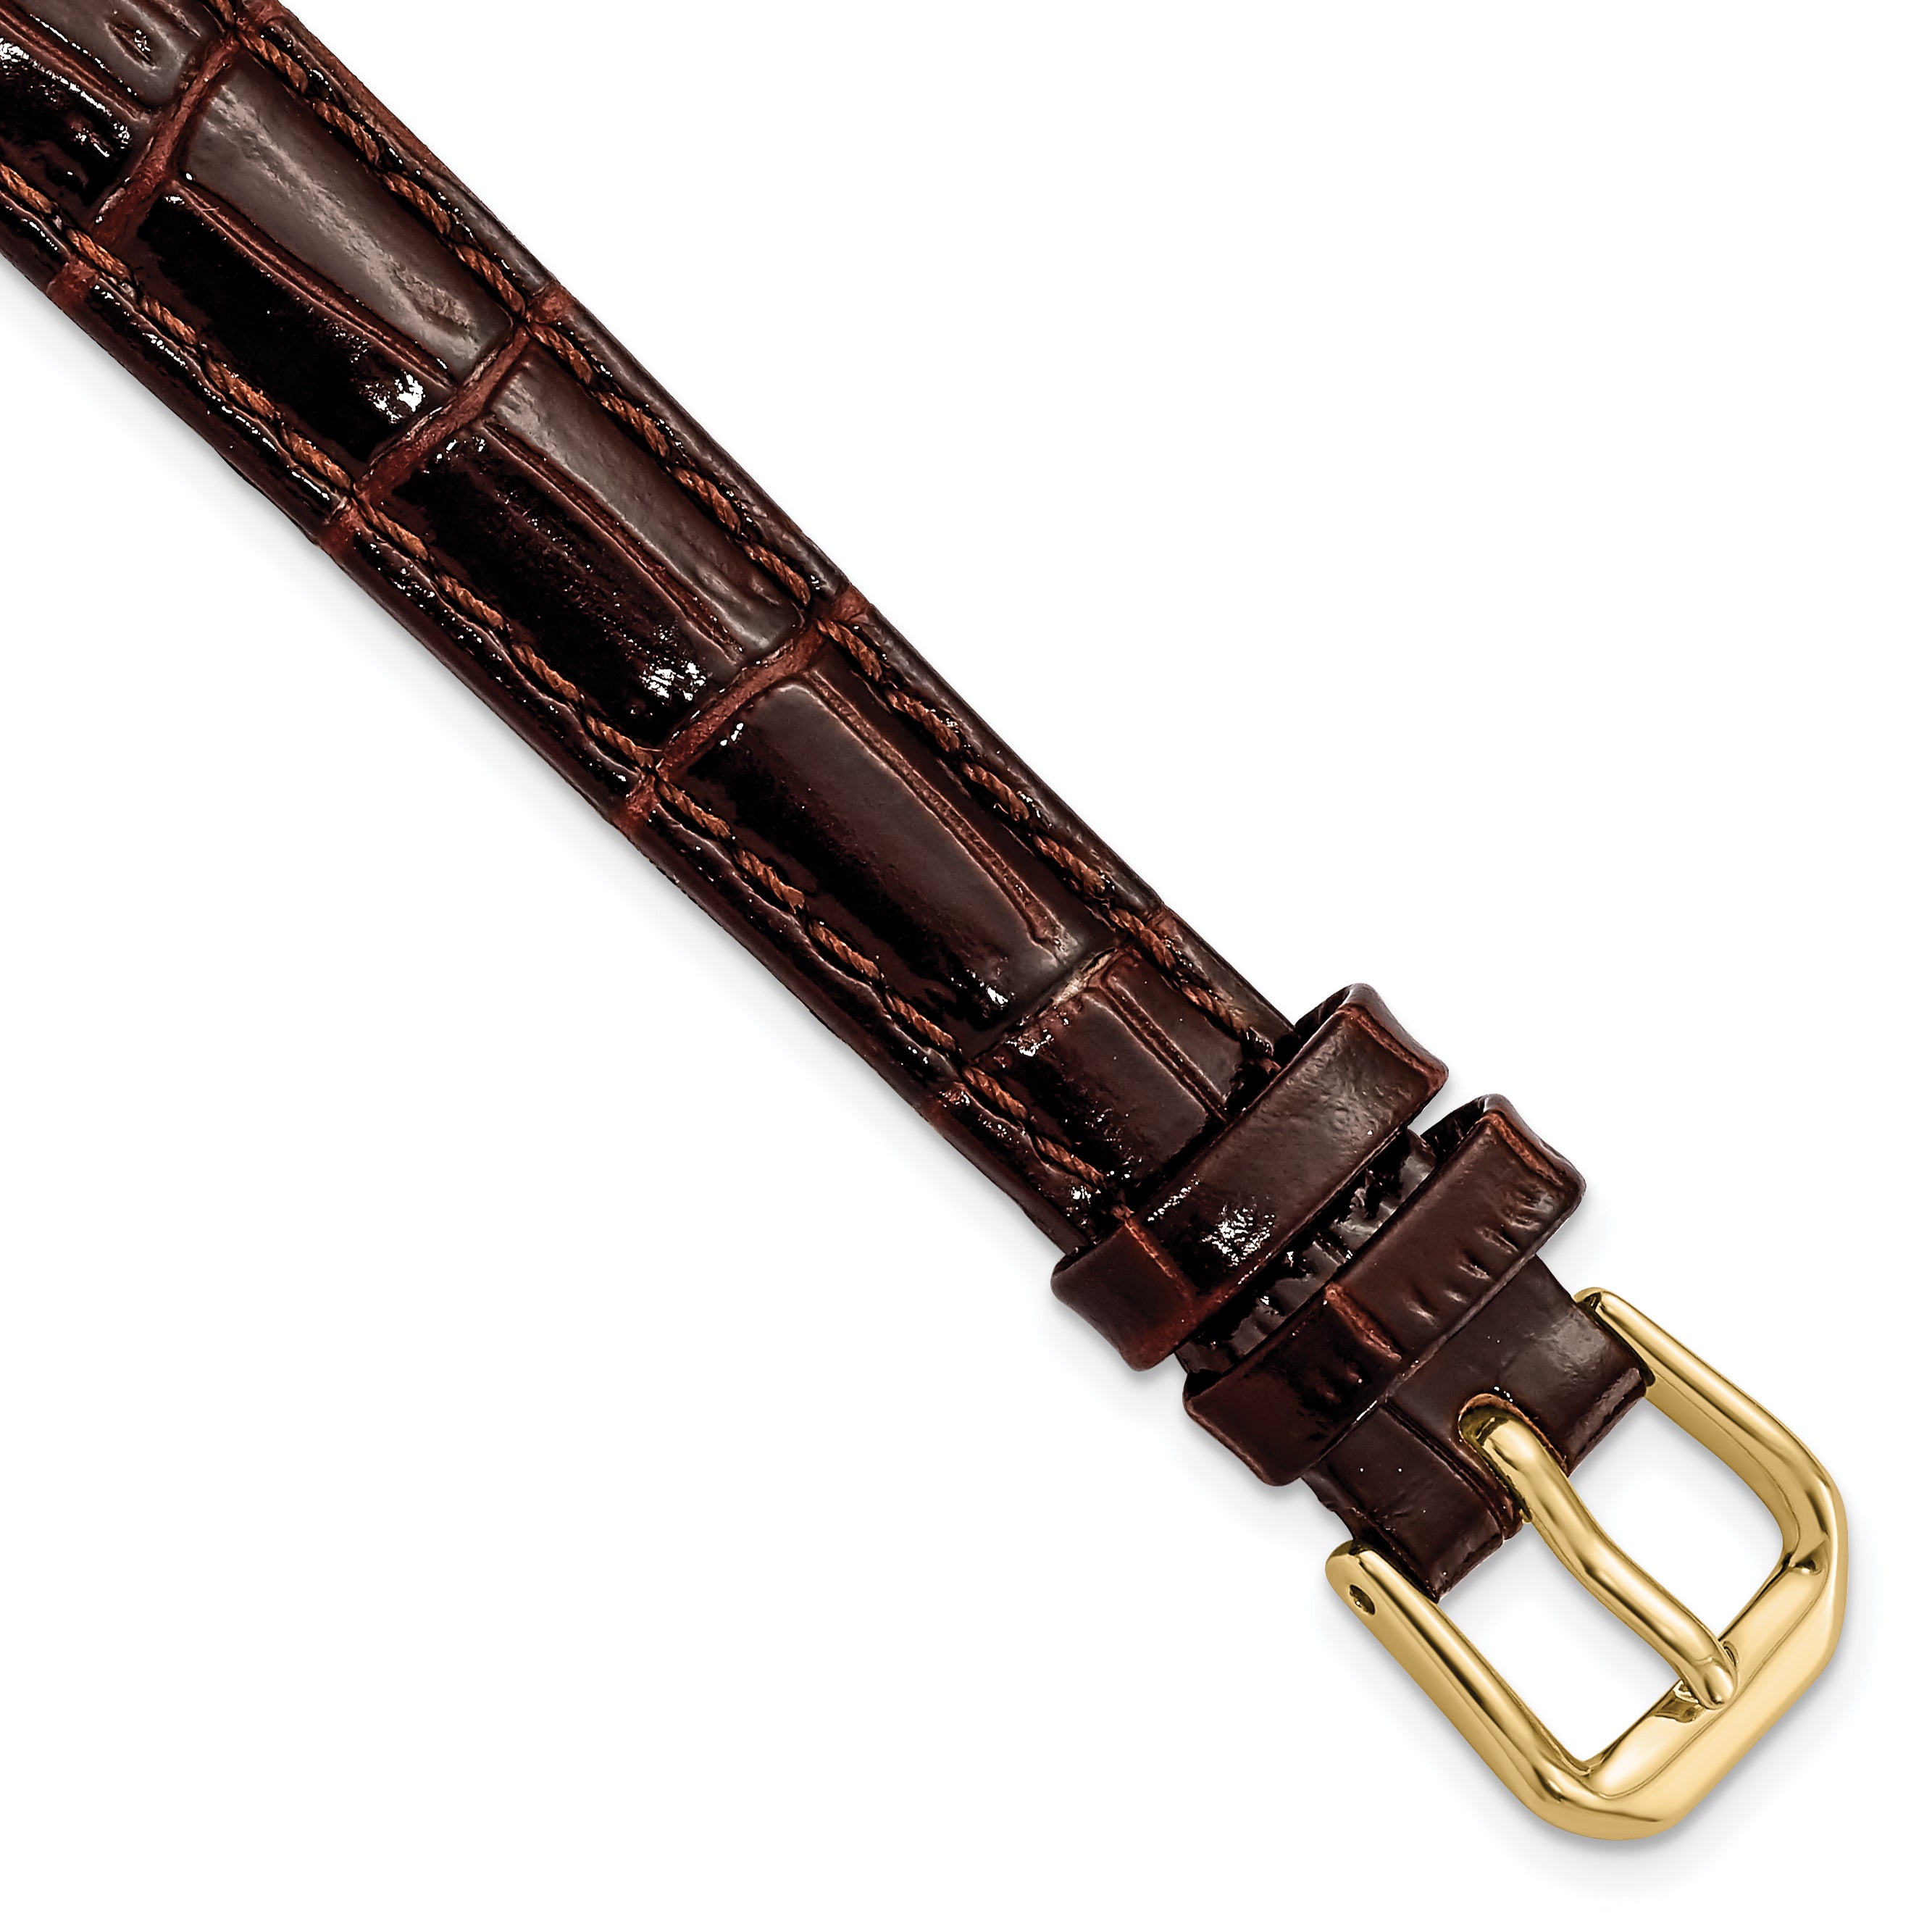 DeBeer 12mm Brown Crocodile Grain Leather with Dark Stitching and Gold-tone Buckle 6.75 inch Watch Band